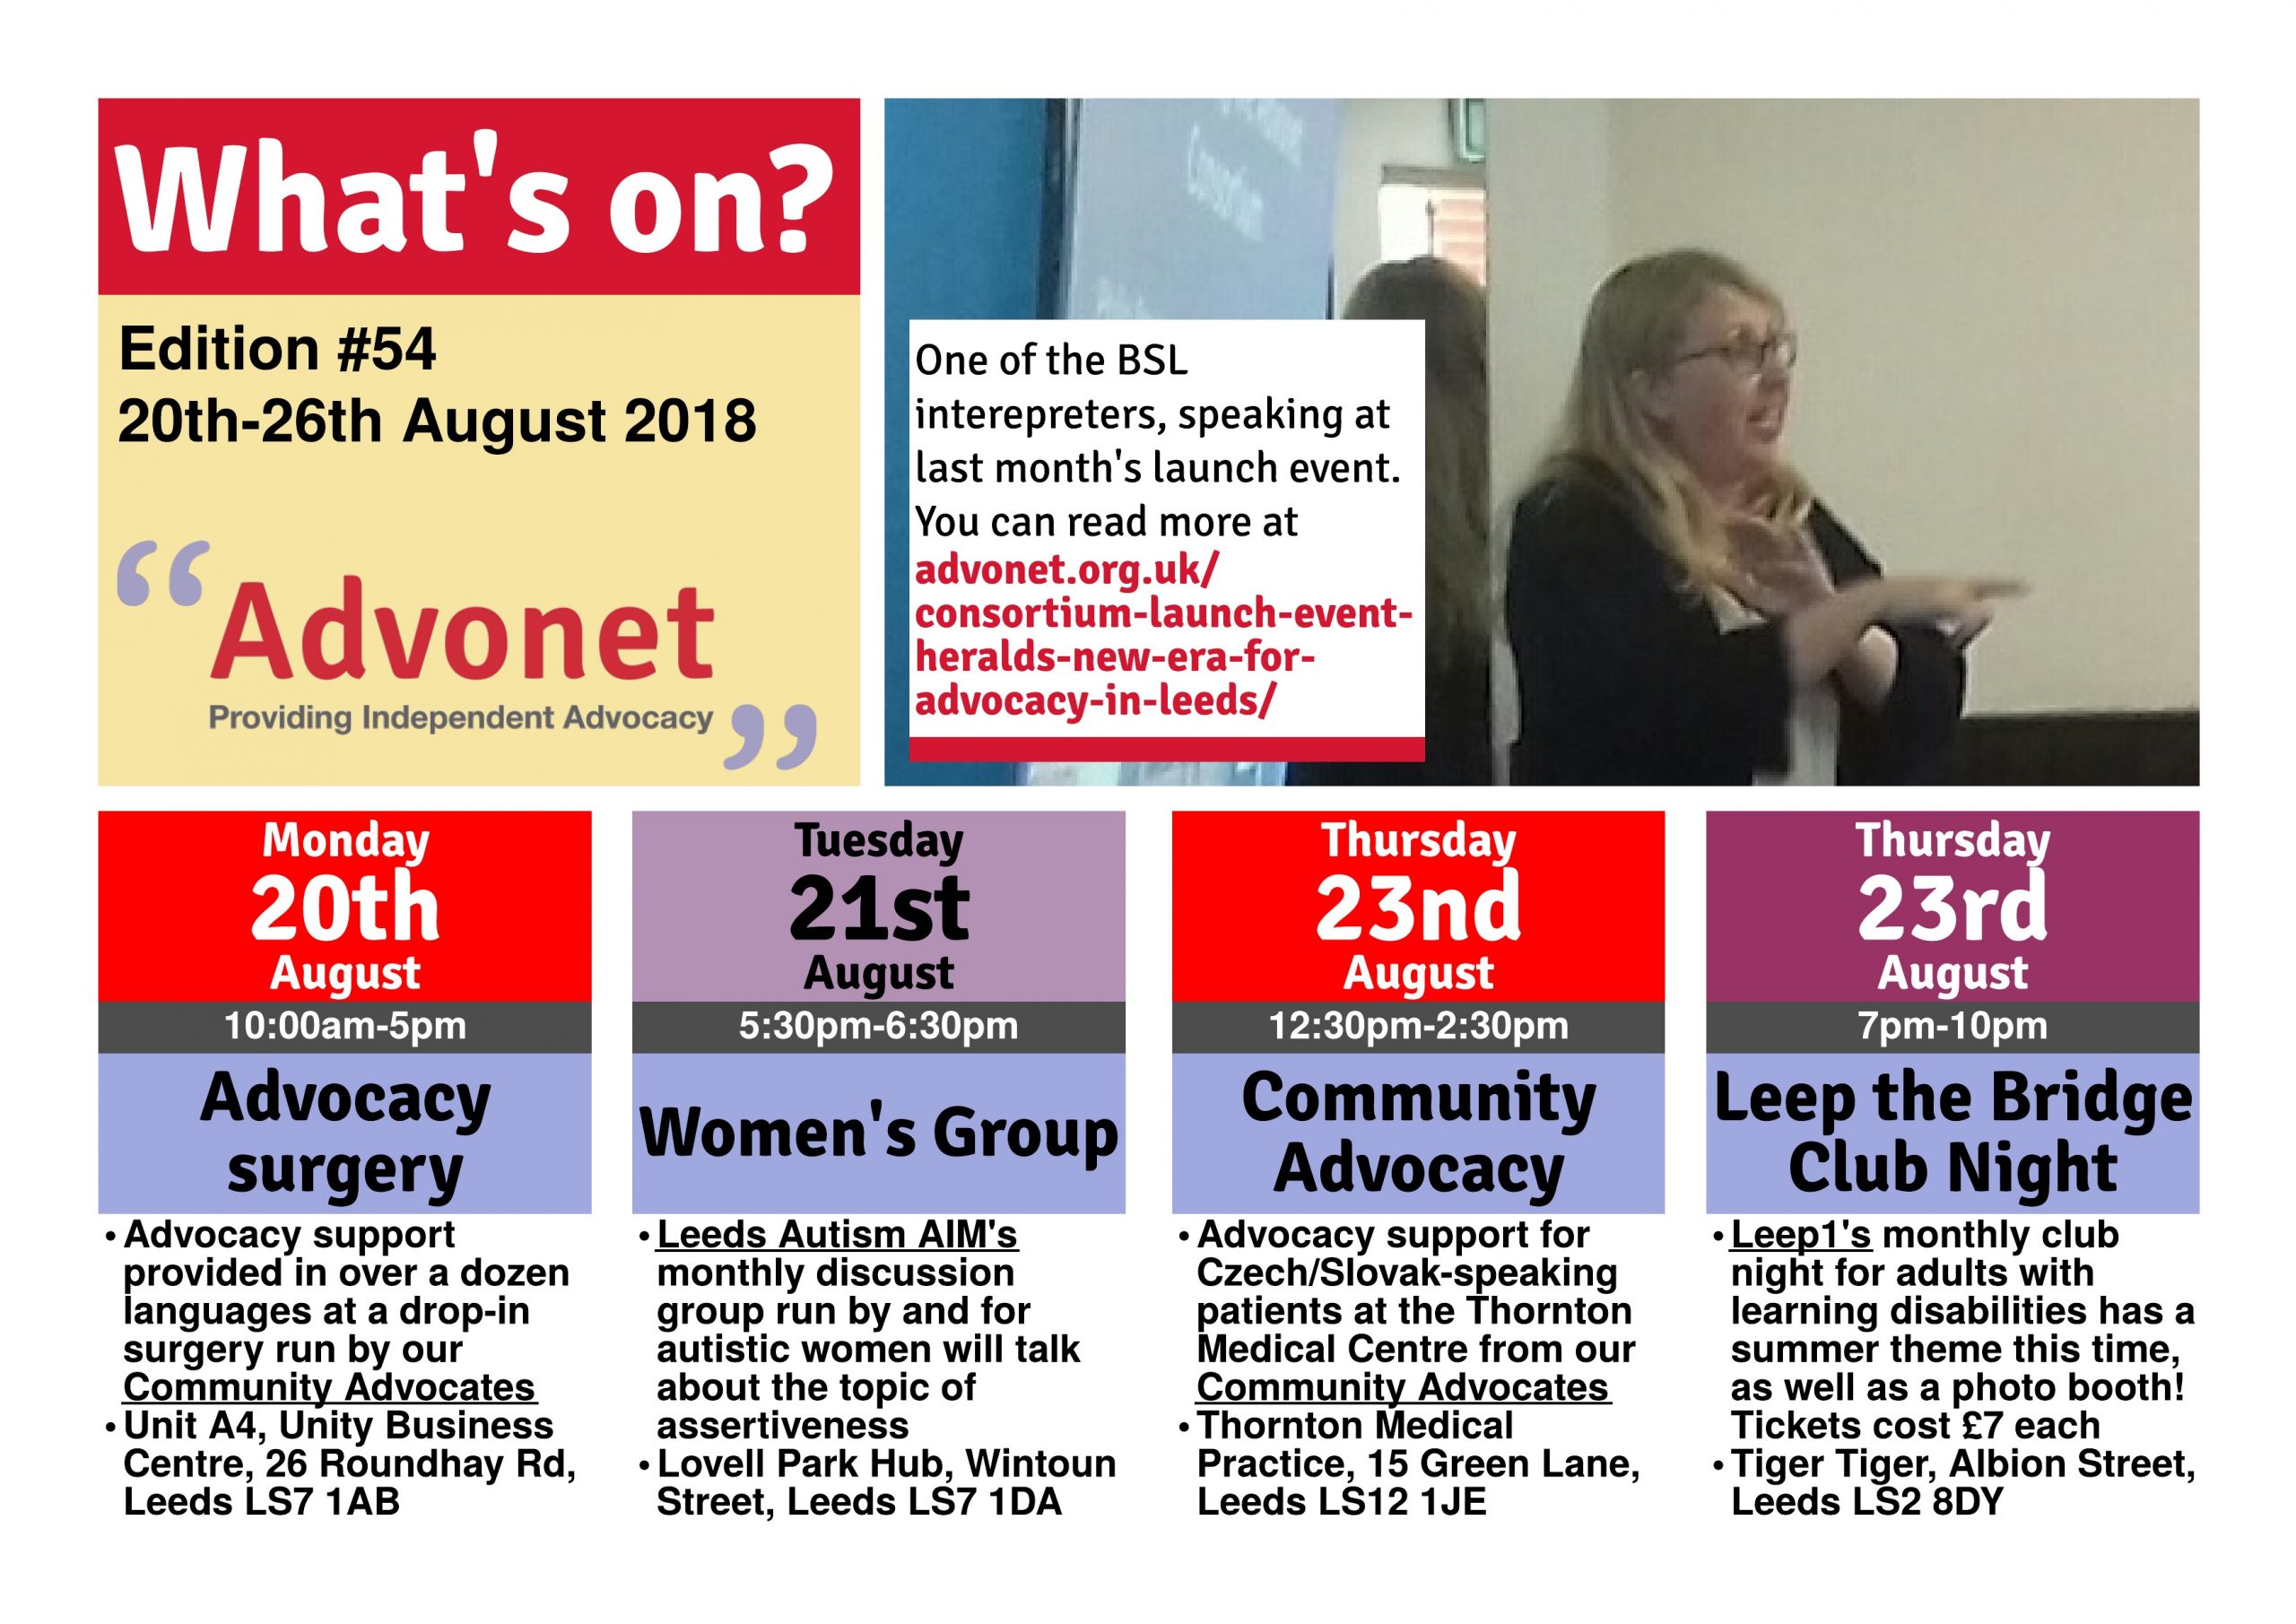 What's On - 20th-26th August 2018